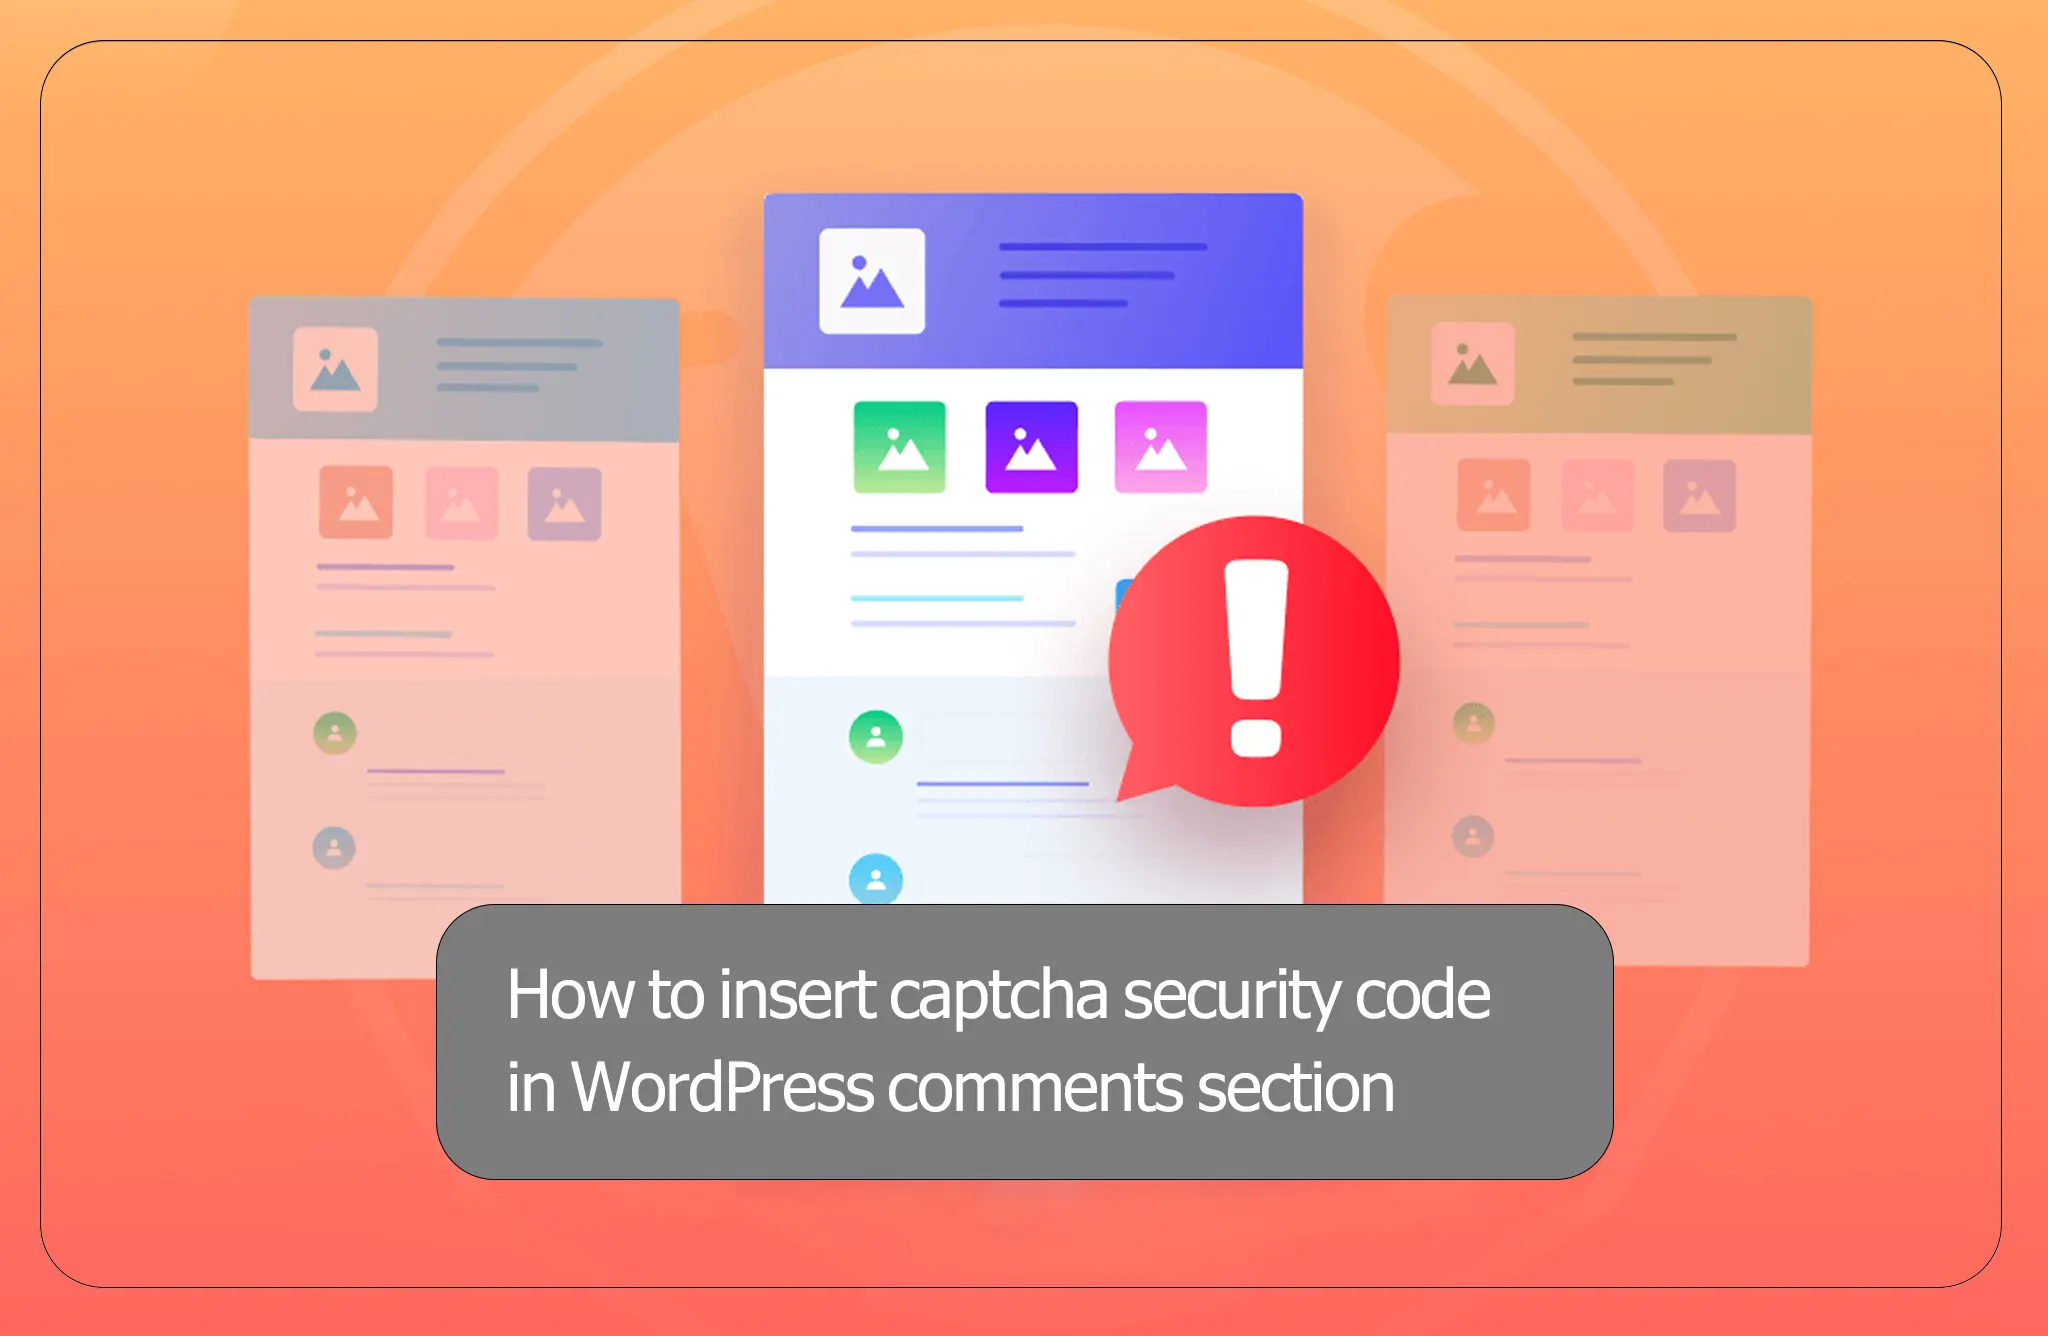 How to insert captcha security code in WordPress comments section